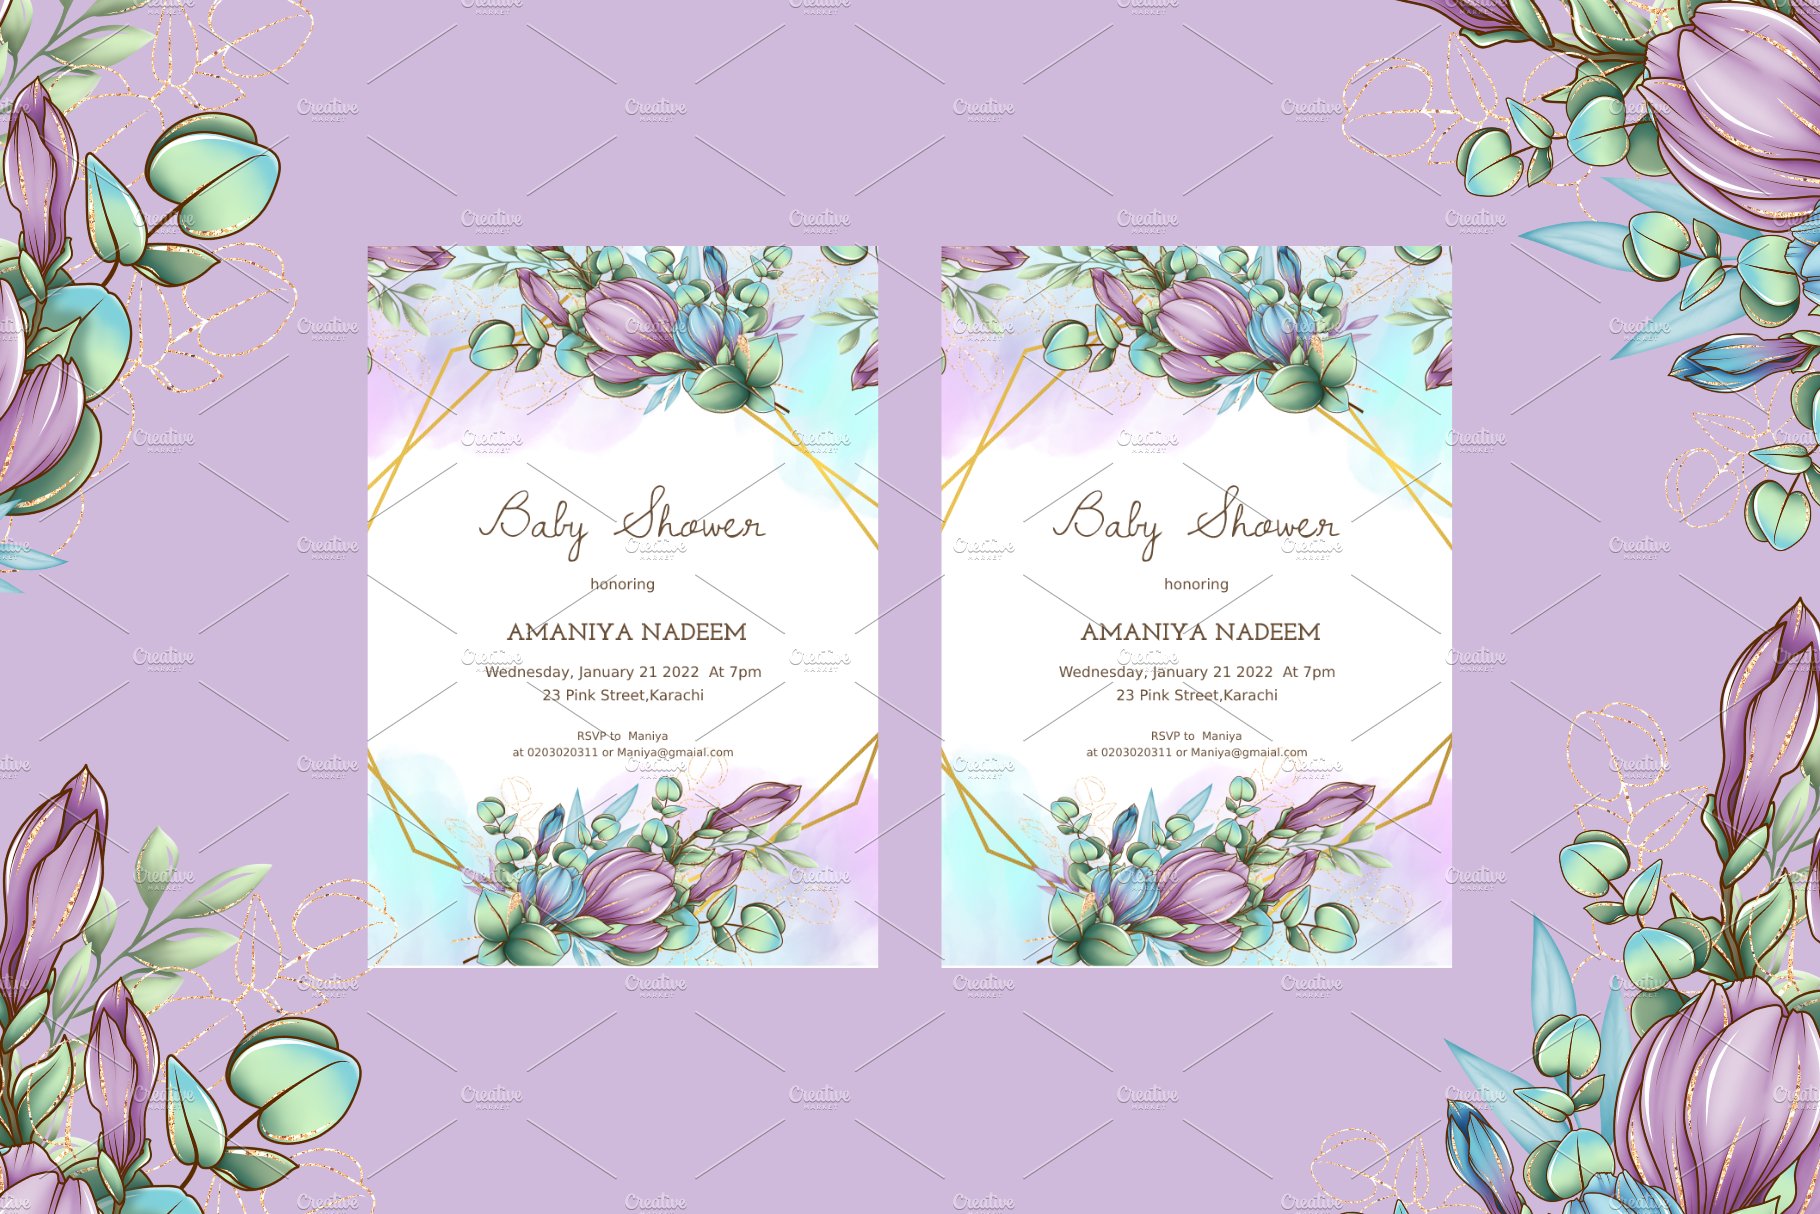 Beautiful Baby Shower Invite cover image.